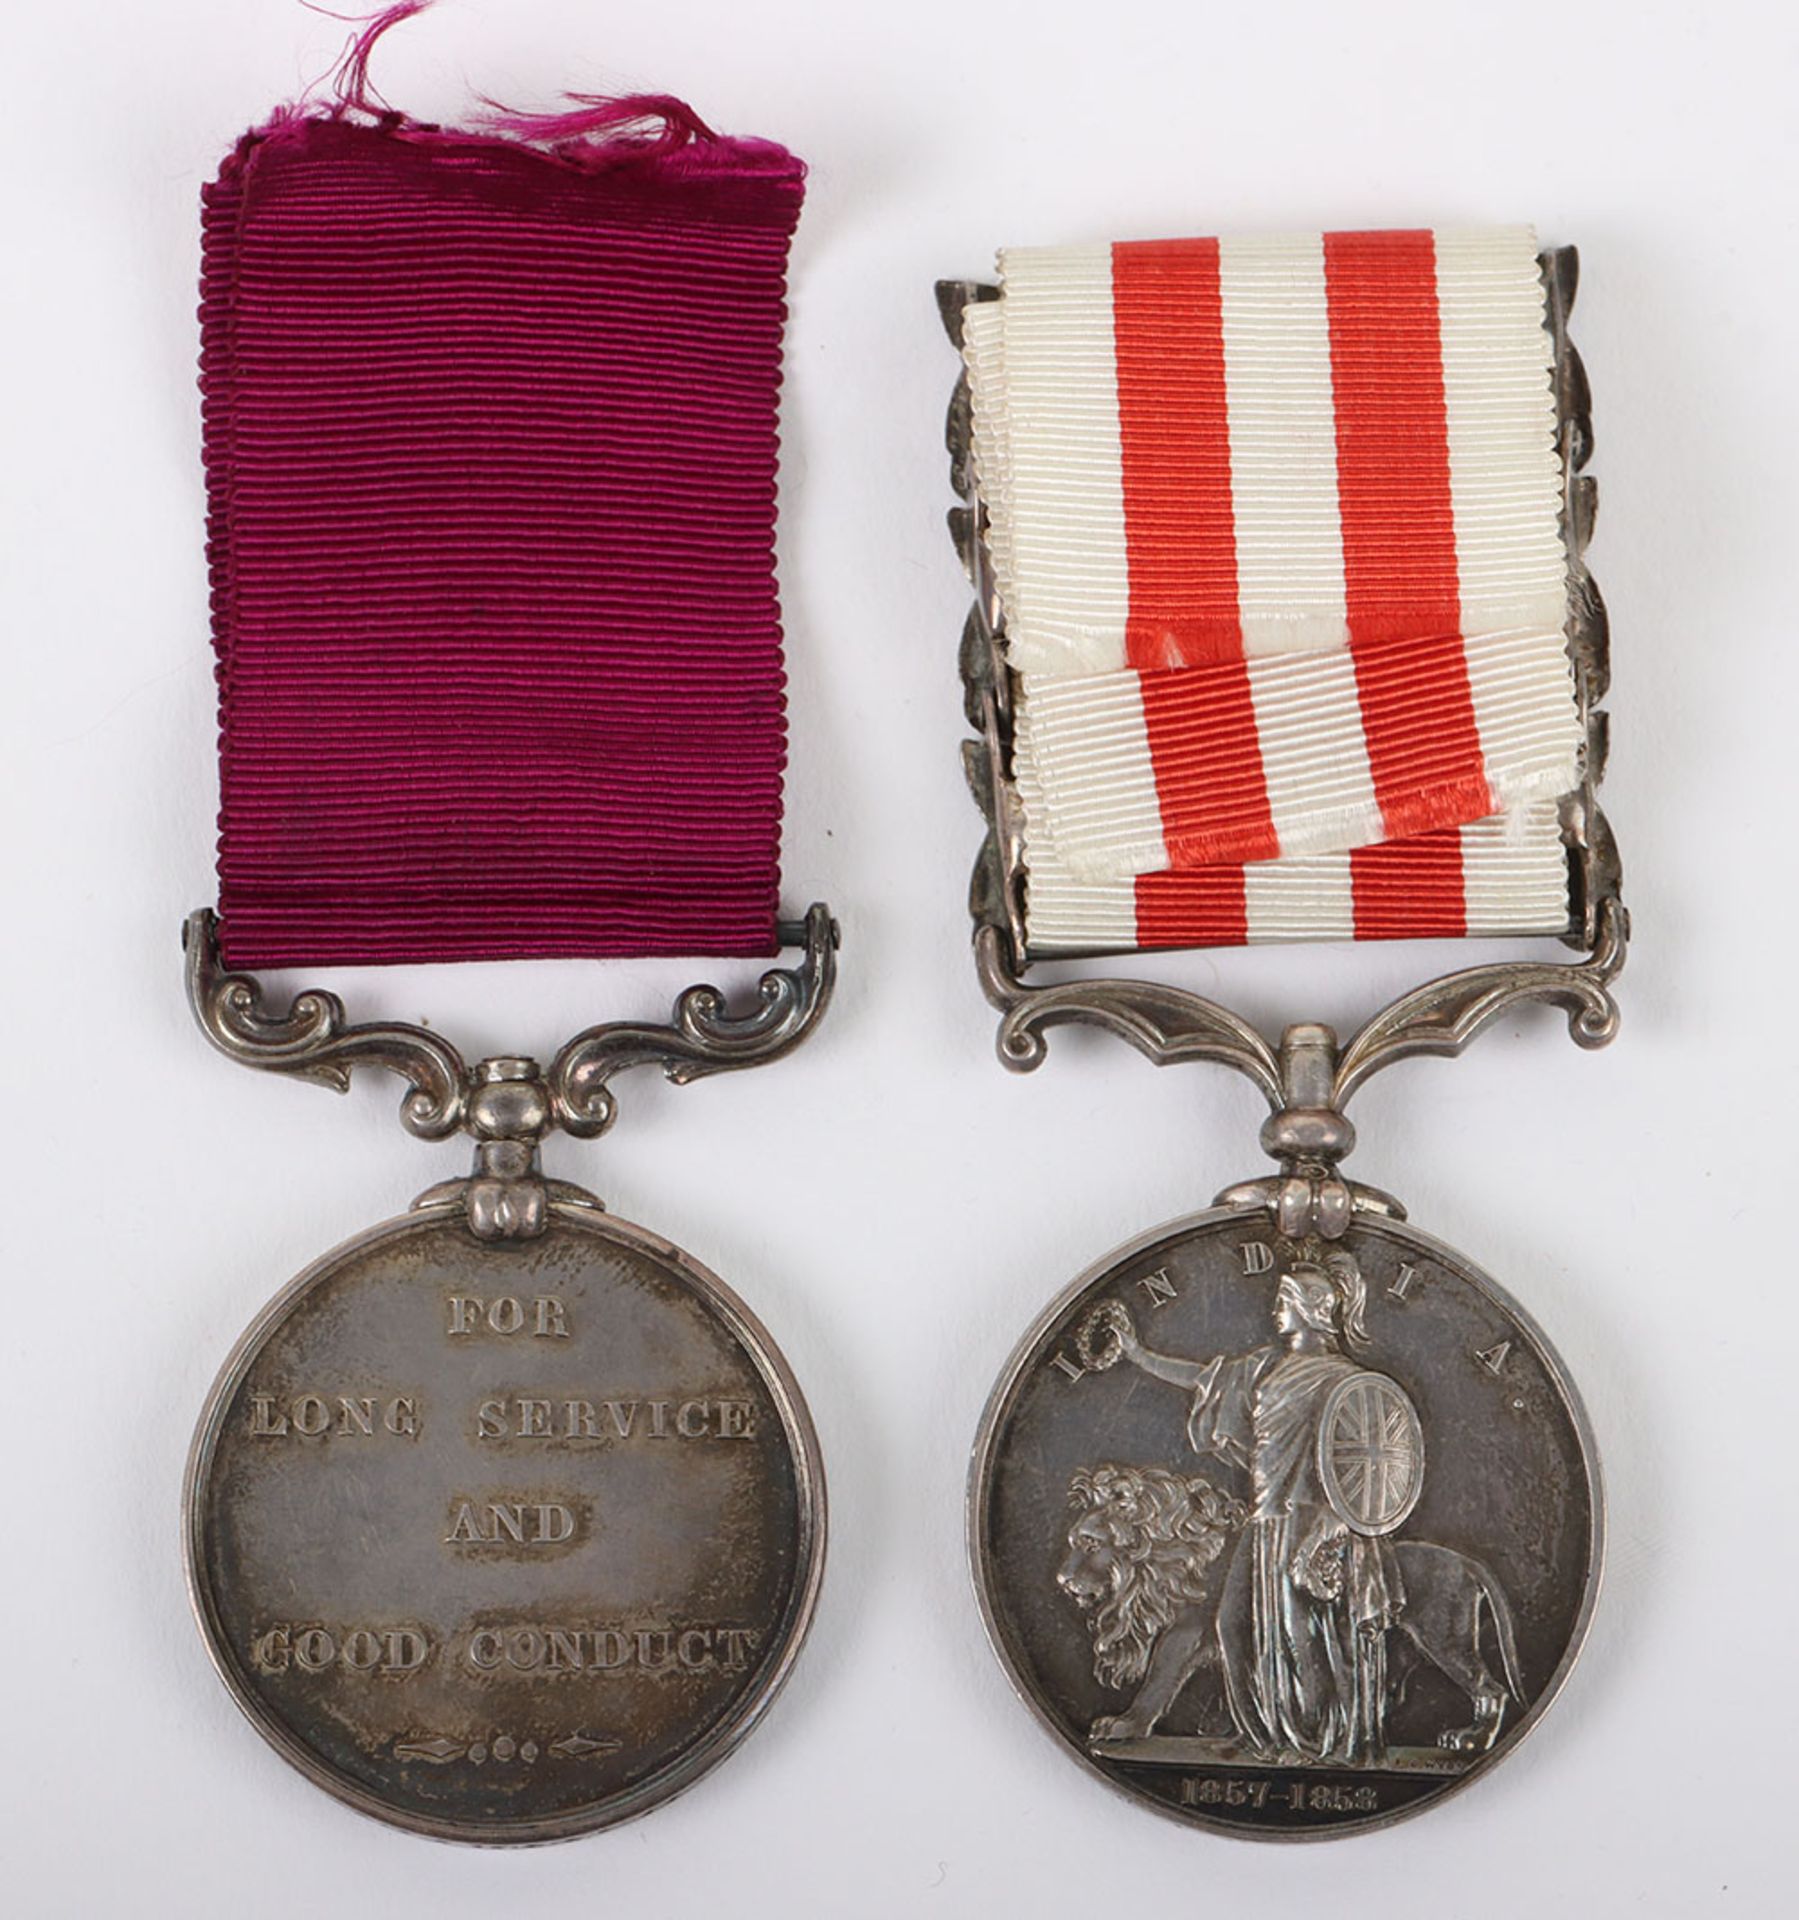 Indian Mutiny and Long Service Medal Pair to an Artilleryman Who Served in the Bengal Horse Artiller - Image 9 of 10